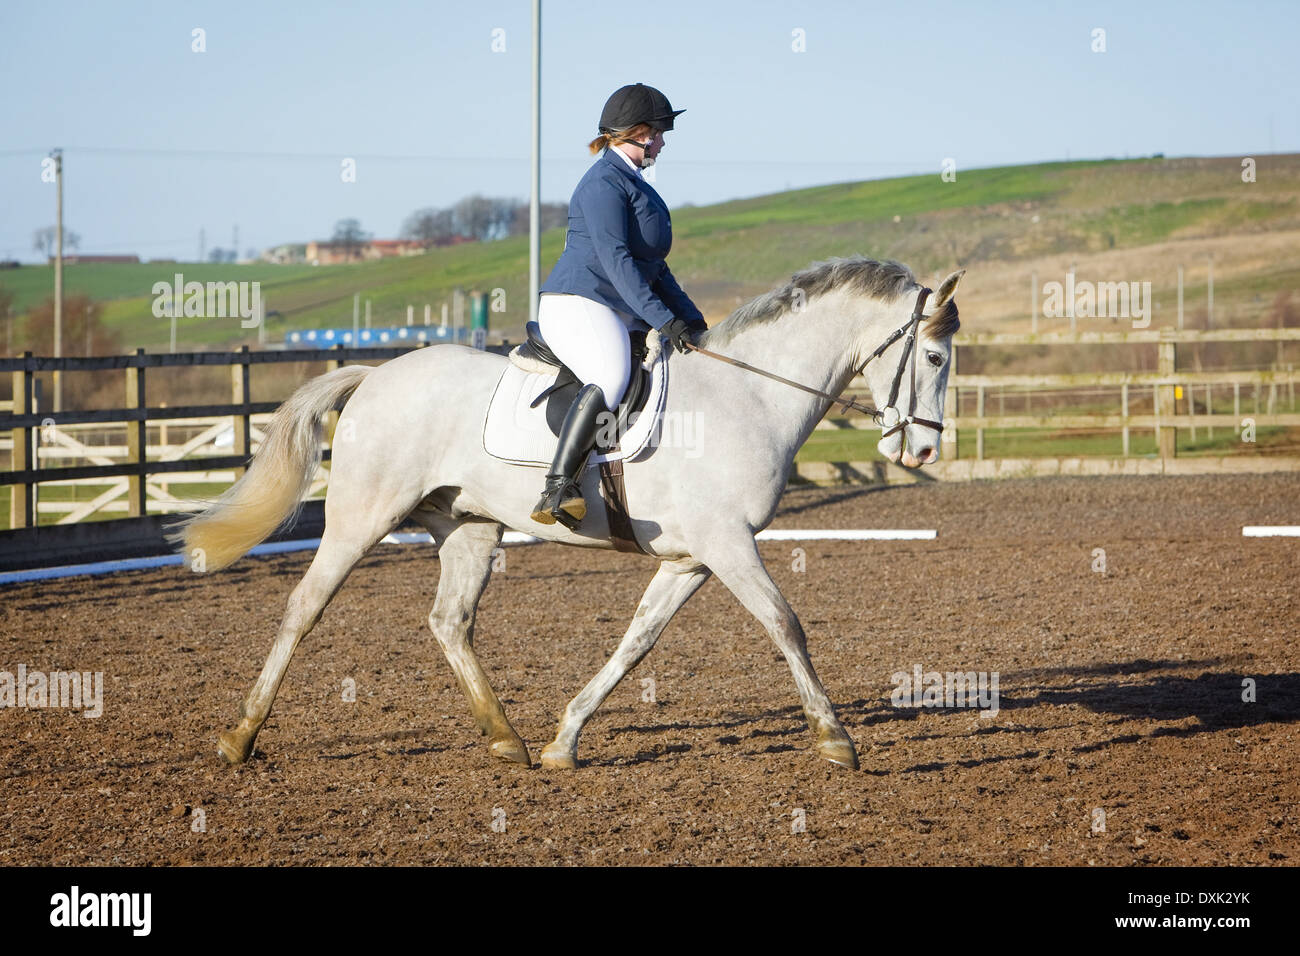 A horse and rider competing in a dressage event held outside on a sand and rubber course in England Stock Photo